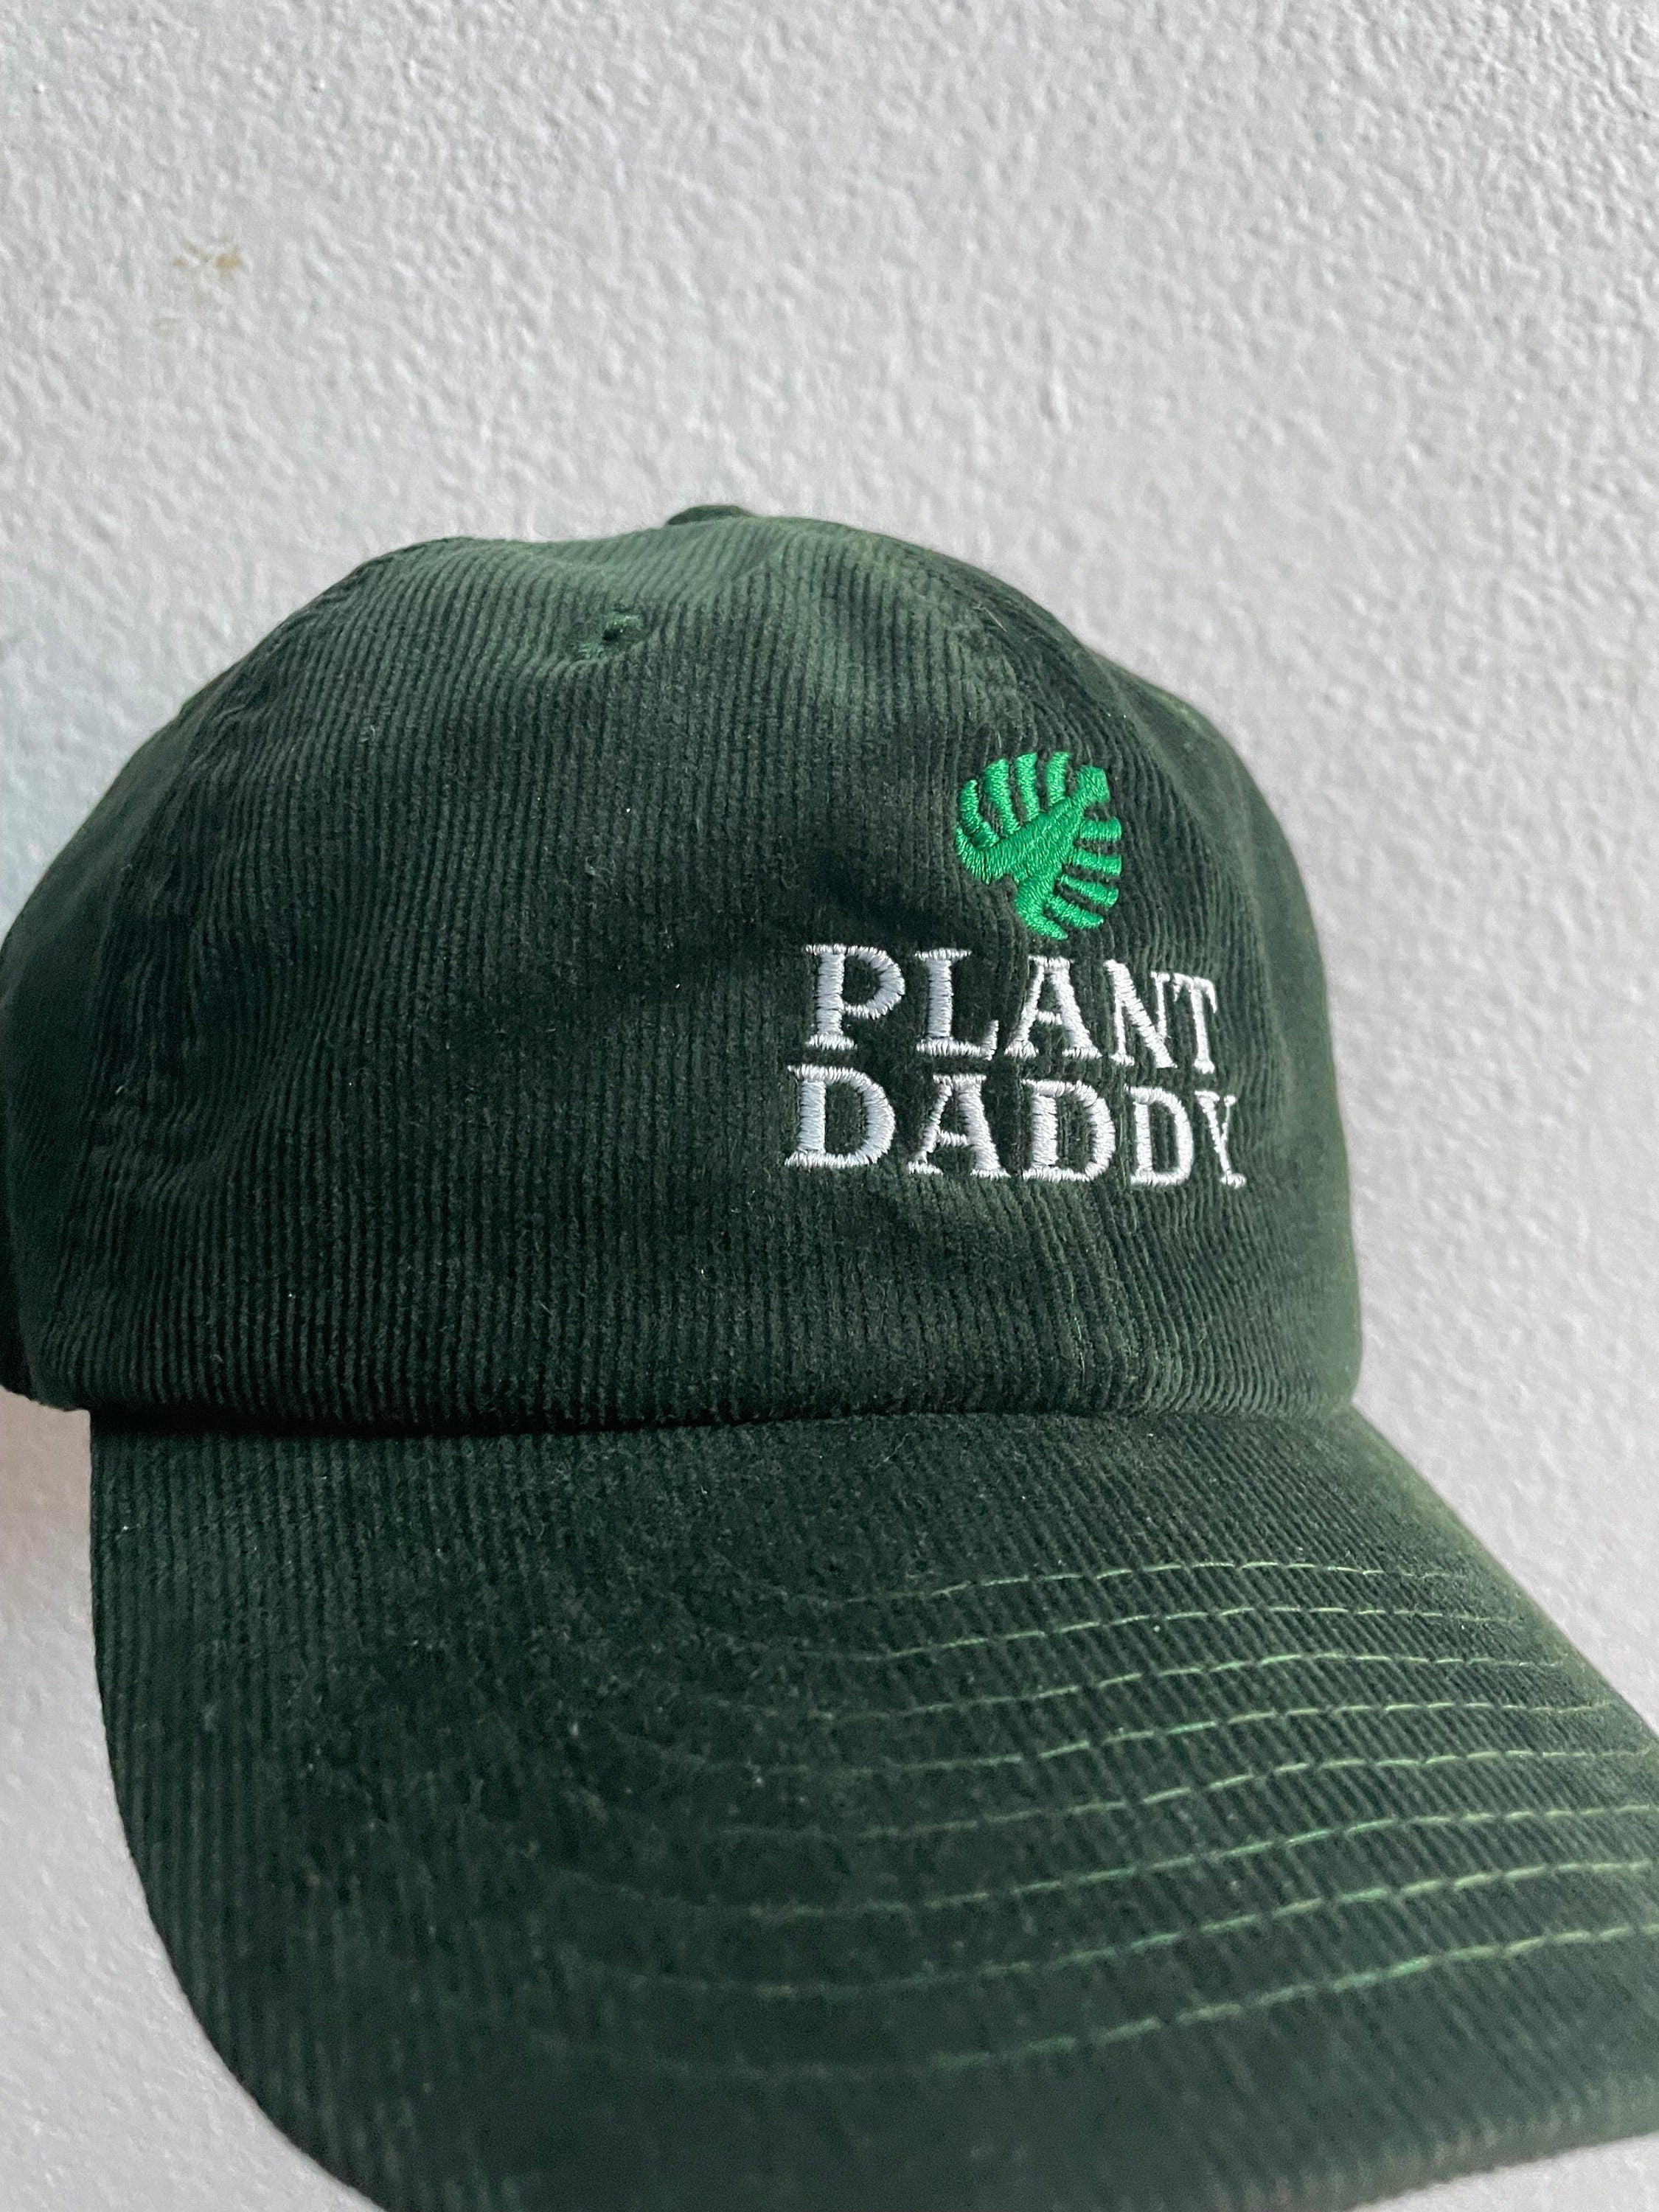 Plant Daddy Corduroy Dad Hat, Plant Lover Gift, Monstera Dad Hat Gift, Plant Daddy Handmade Embroidered Corduroy Dad Hat - Multiple Colors